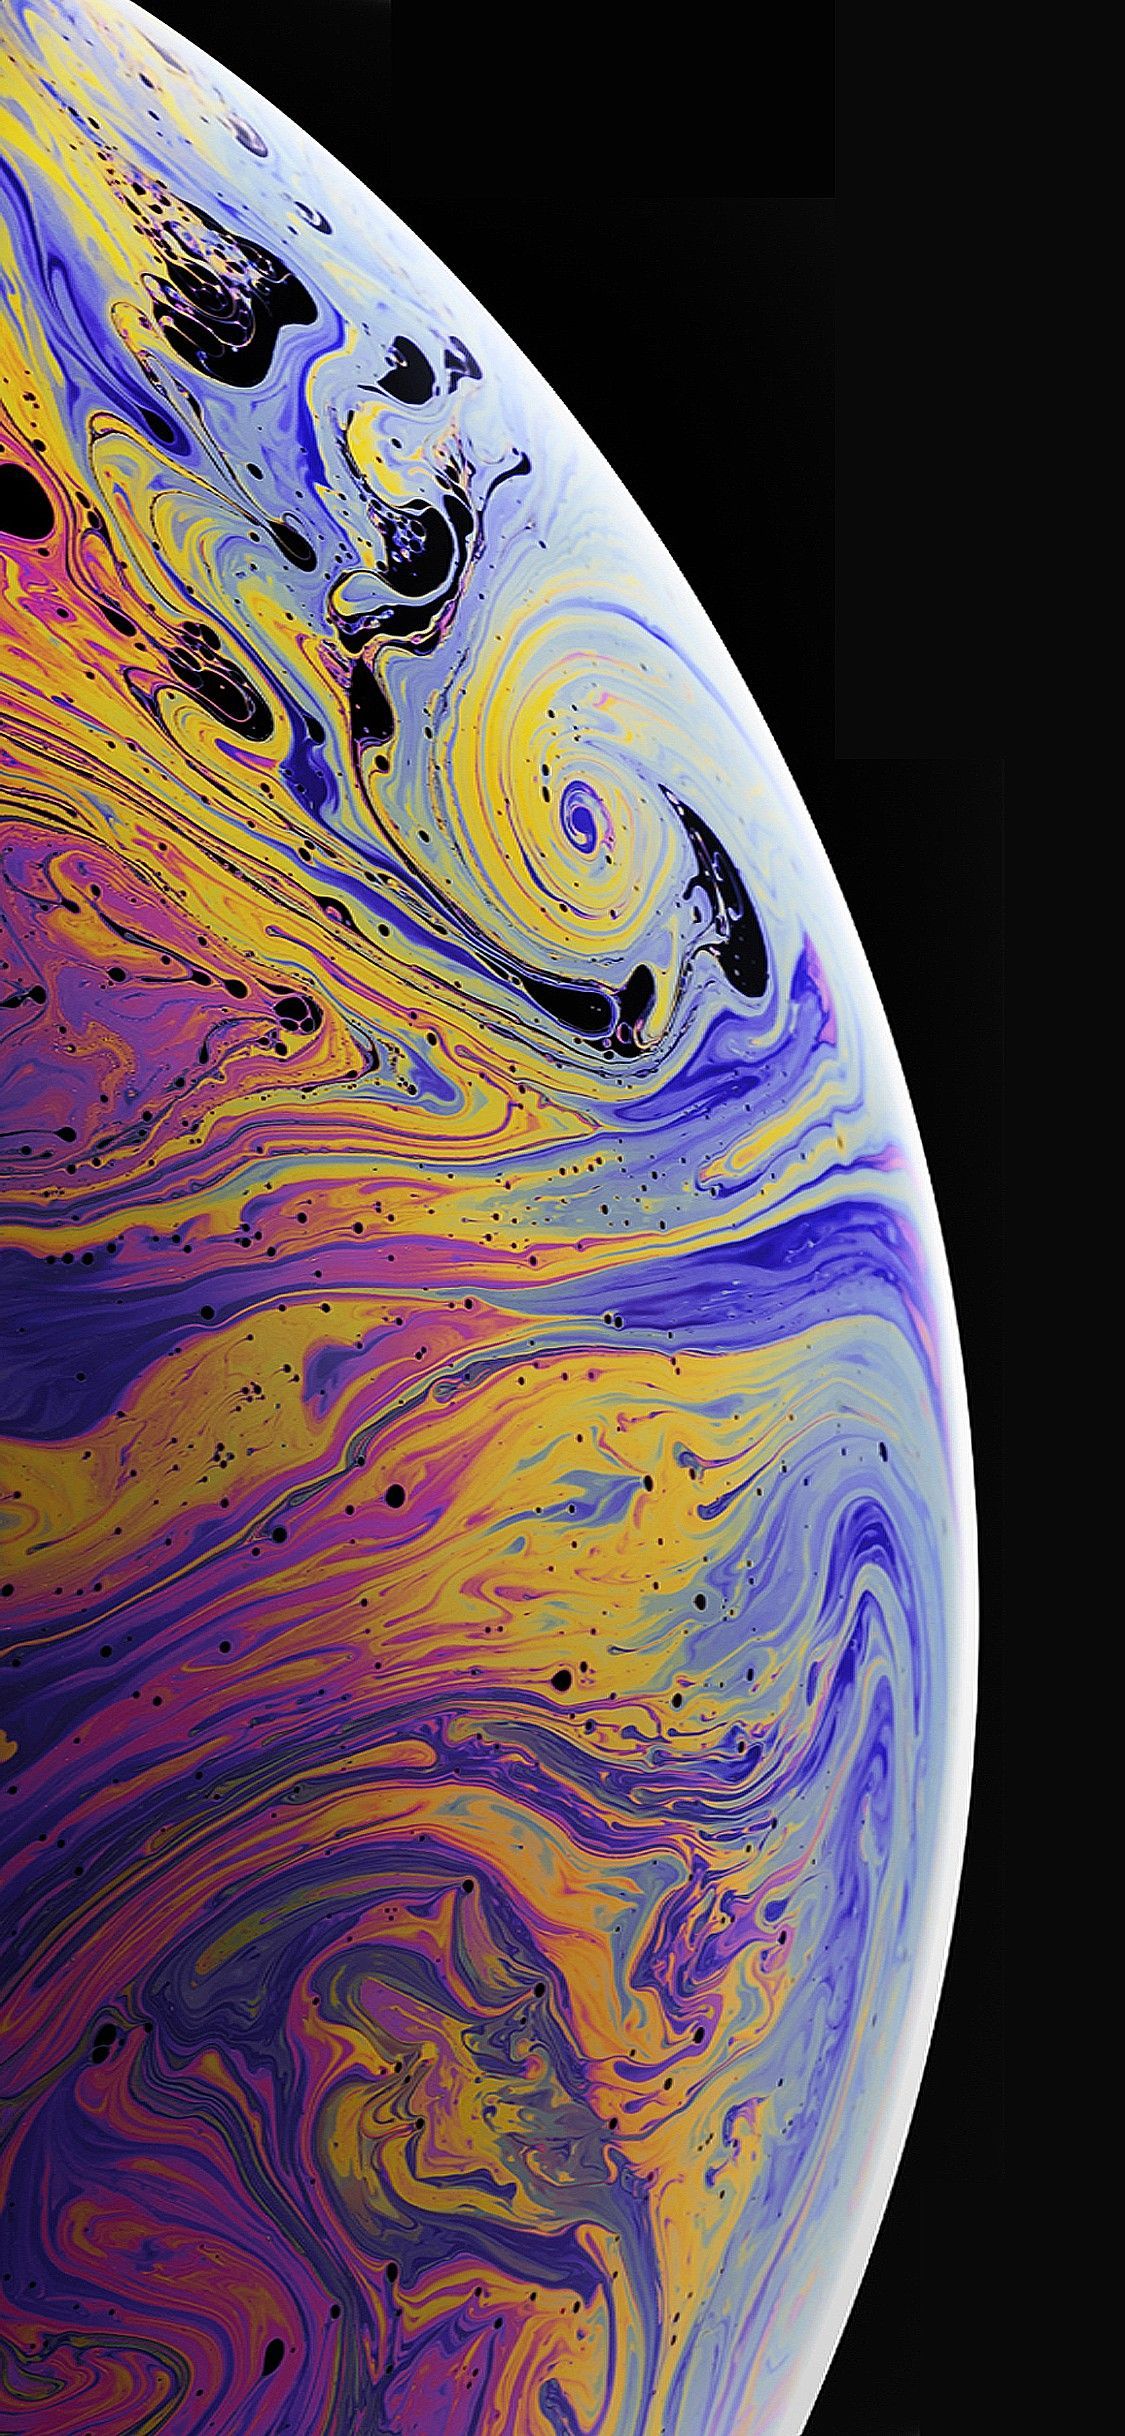 Amoled iPhone Xs Max Wallpapers - Wallpaper Cave